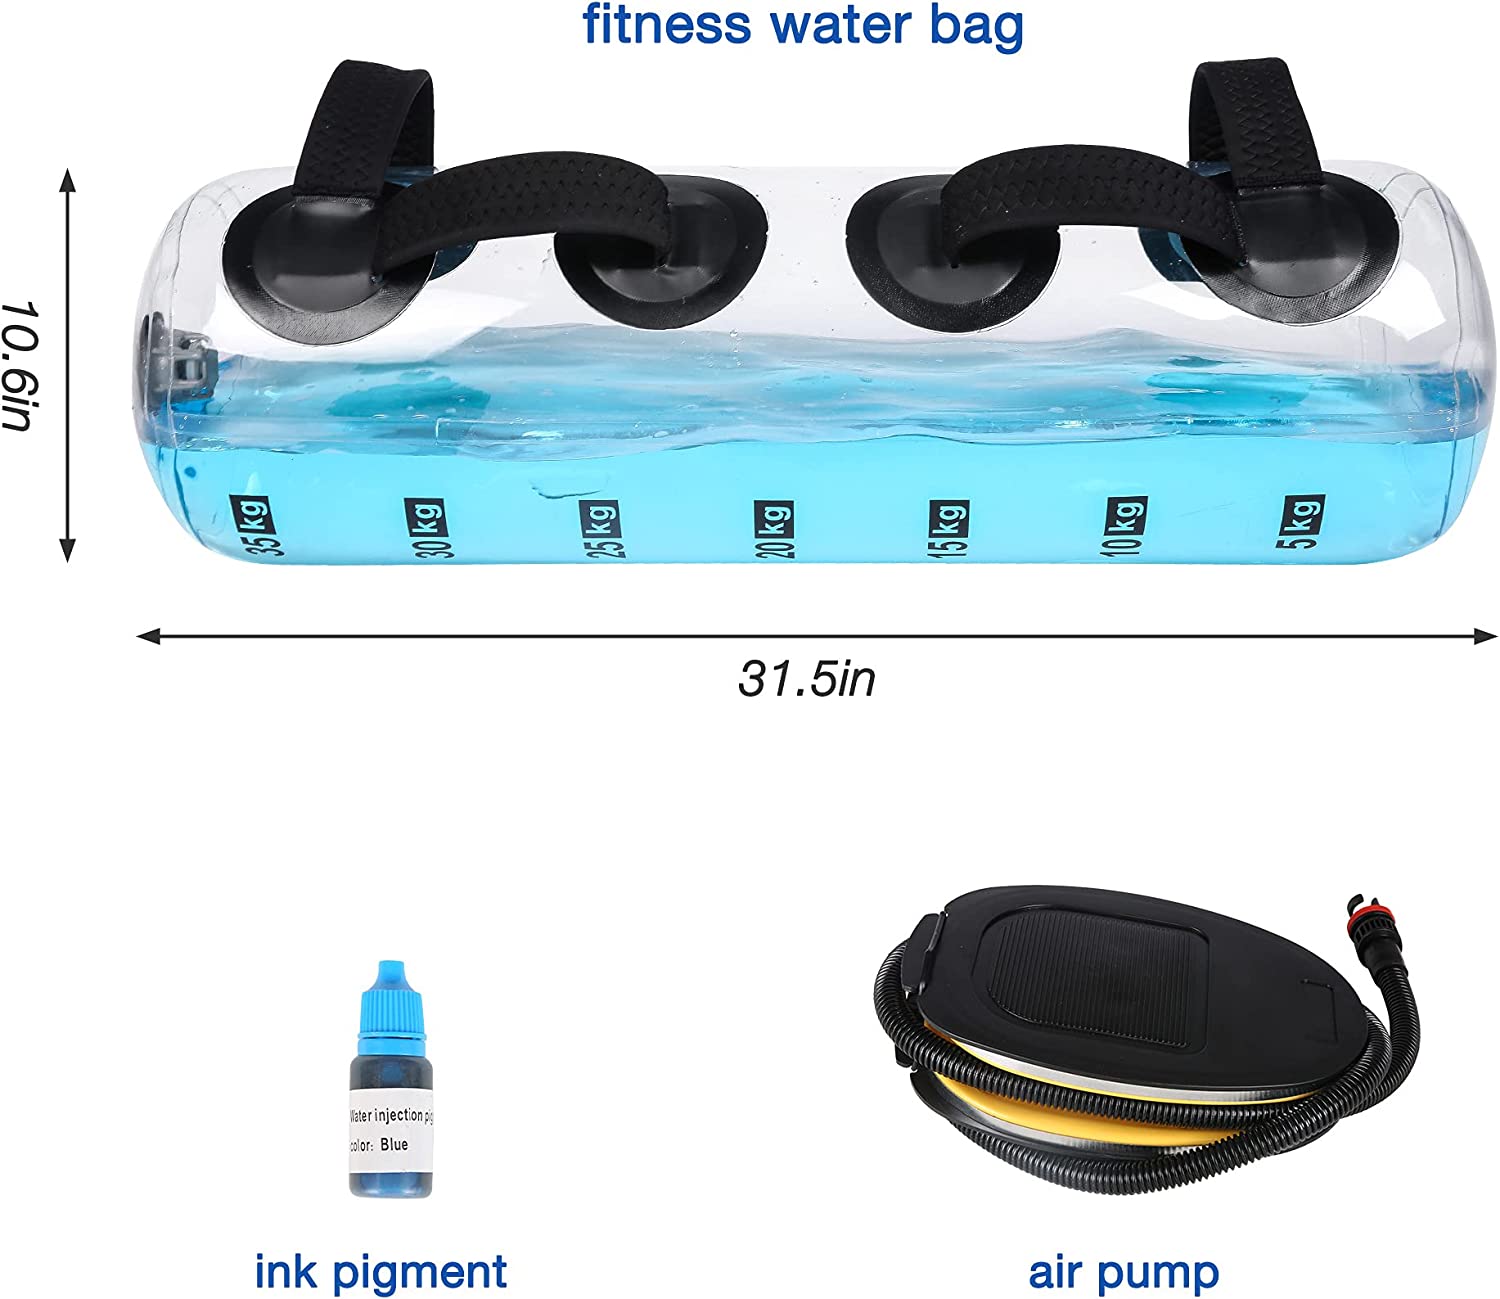 (Out of Stock) Portable Fitness Aqua Bag for Home Workout